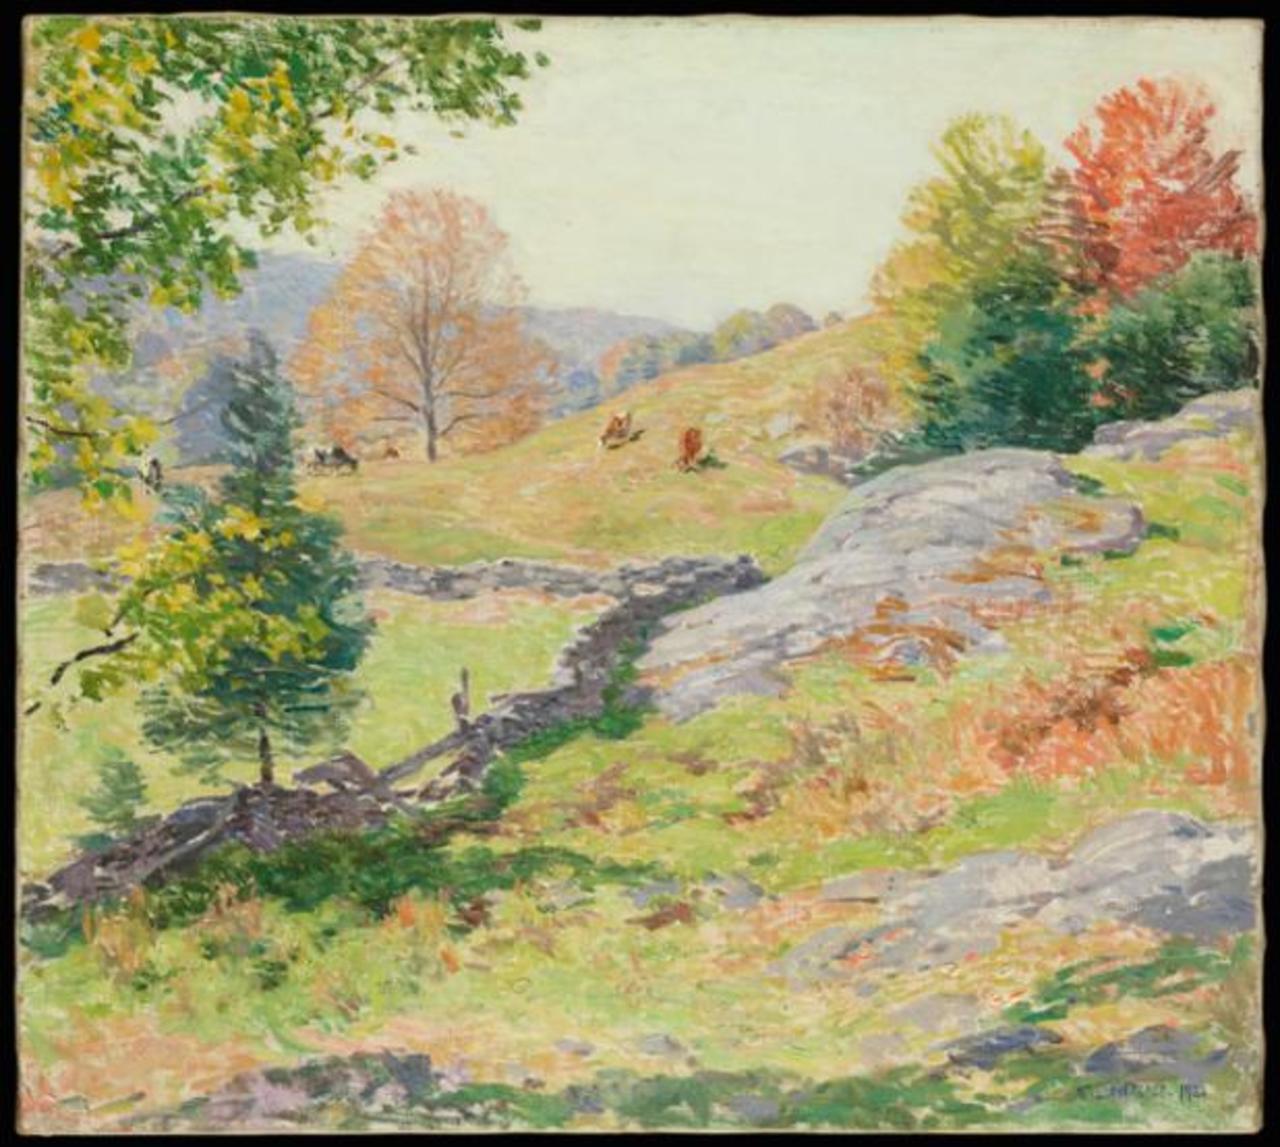 RT @metmuseum: Willard Metcalf's September landscape depicts the hilly farmland around Springfield, Vermont. http://met.org/1KIa4X9 http://t.co/0vX9eHWrQG